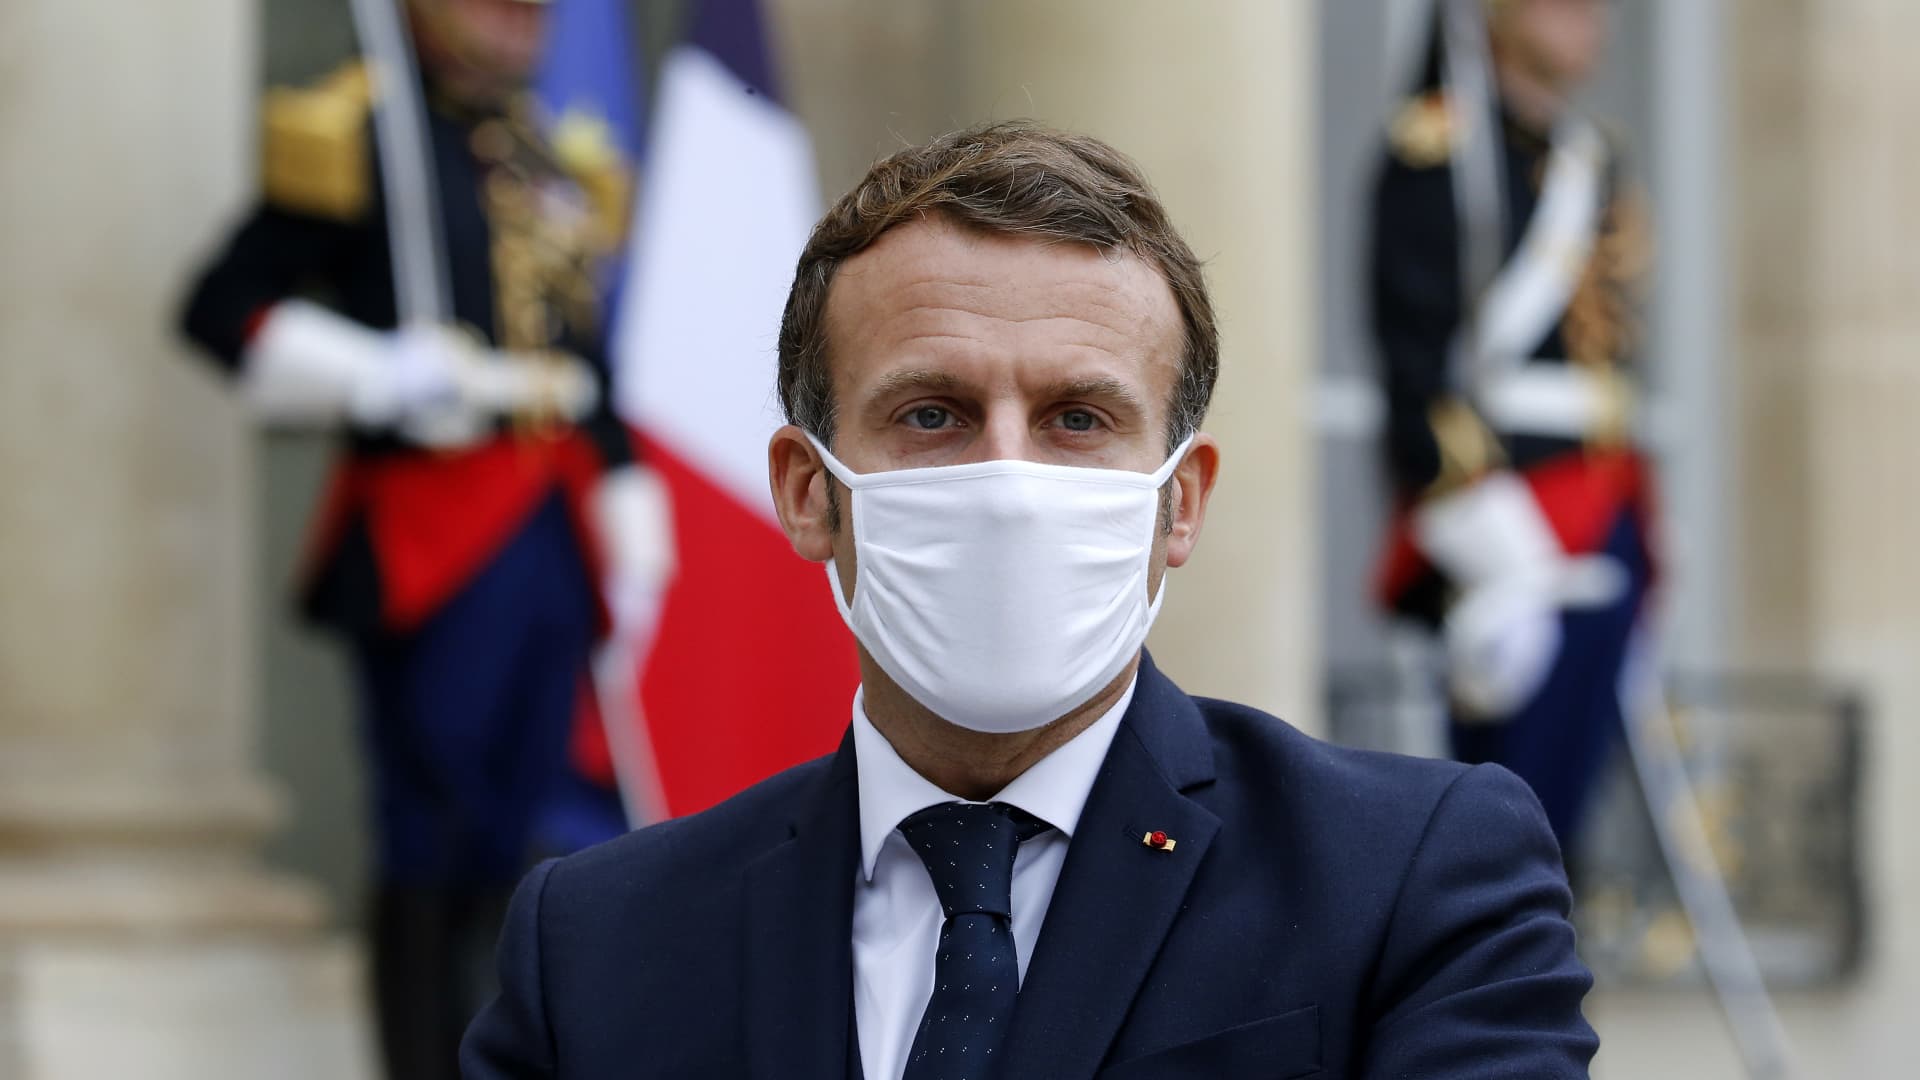 French President Emmanuel Macron wearing a protective face mask looks on as he makes a statement next to Estonian Prime Minister Juri Ratas following their meeting at the Elysee Palace on October 28, 2020 in Paris, France.